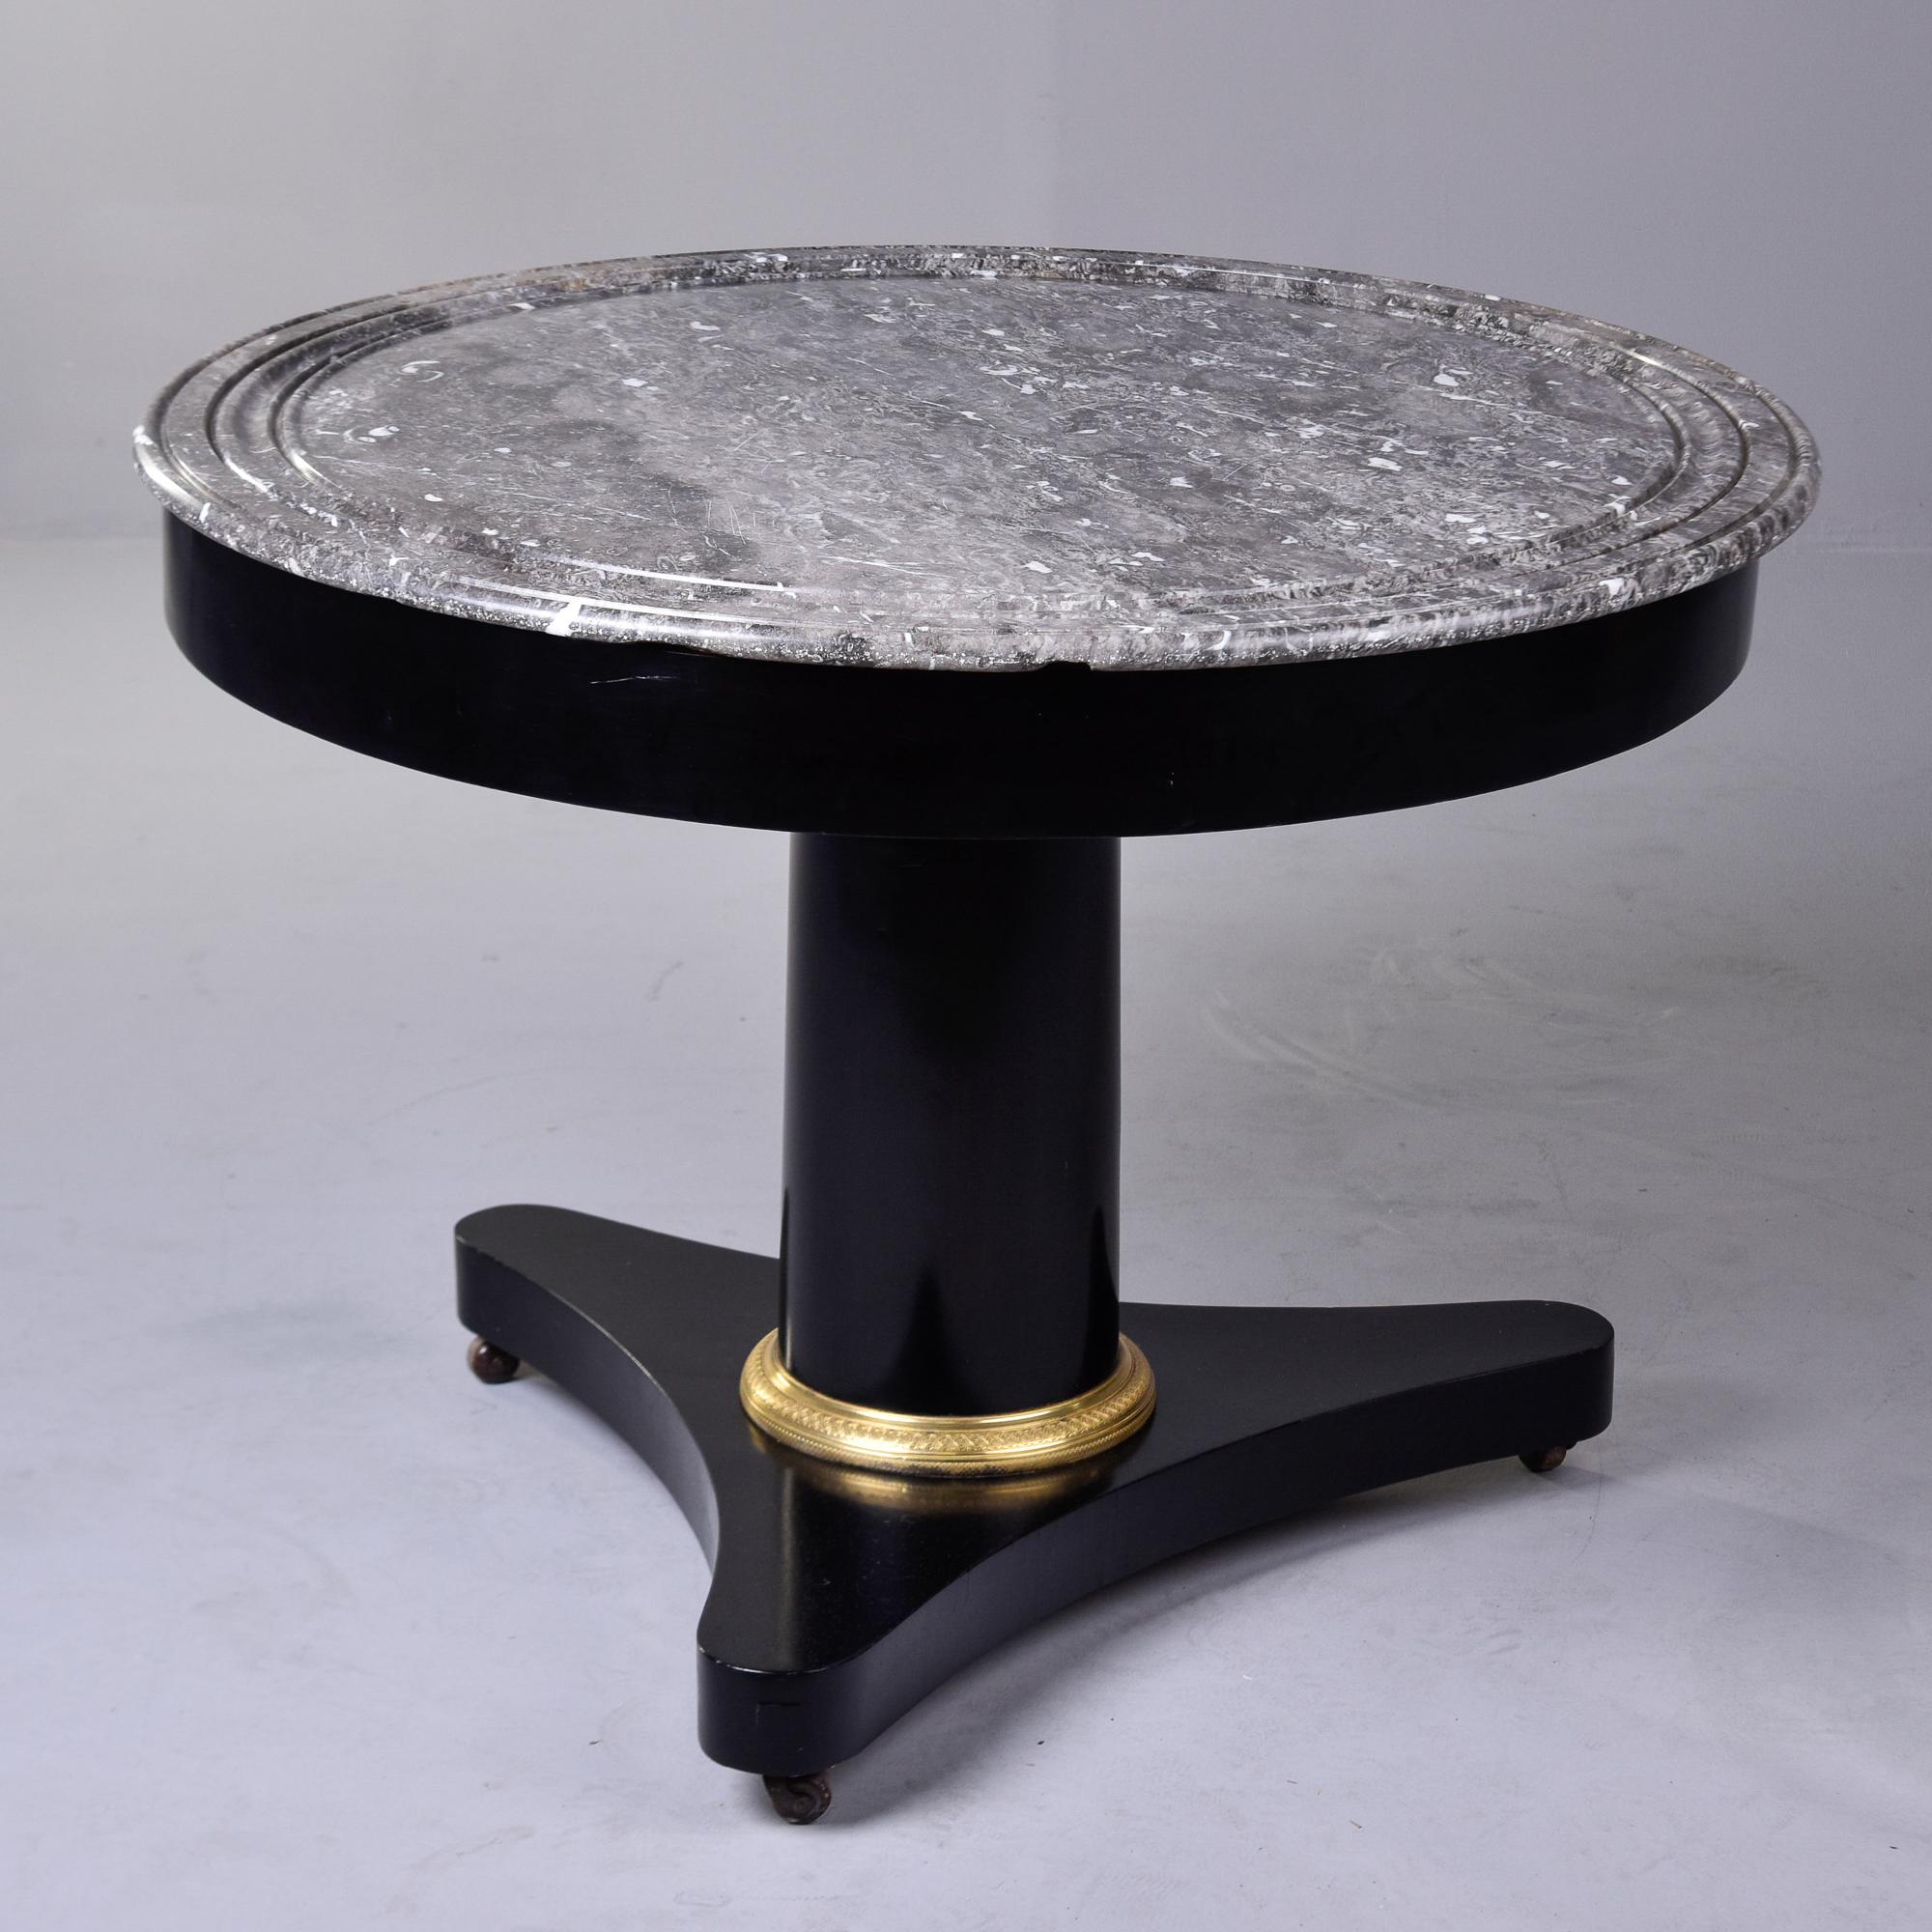 ebonized 19th Century Mahogany Round Center Empire Table with Marble Top For Sale 7